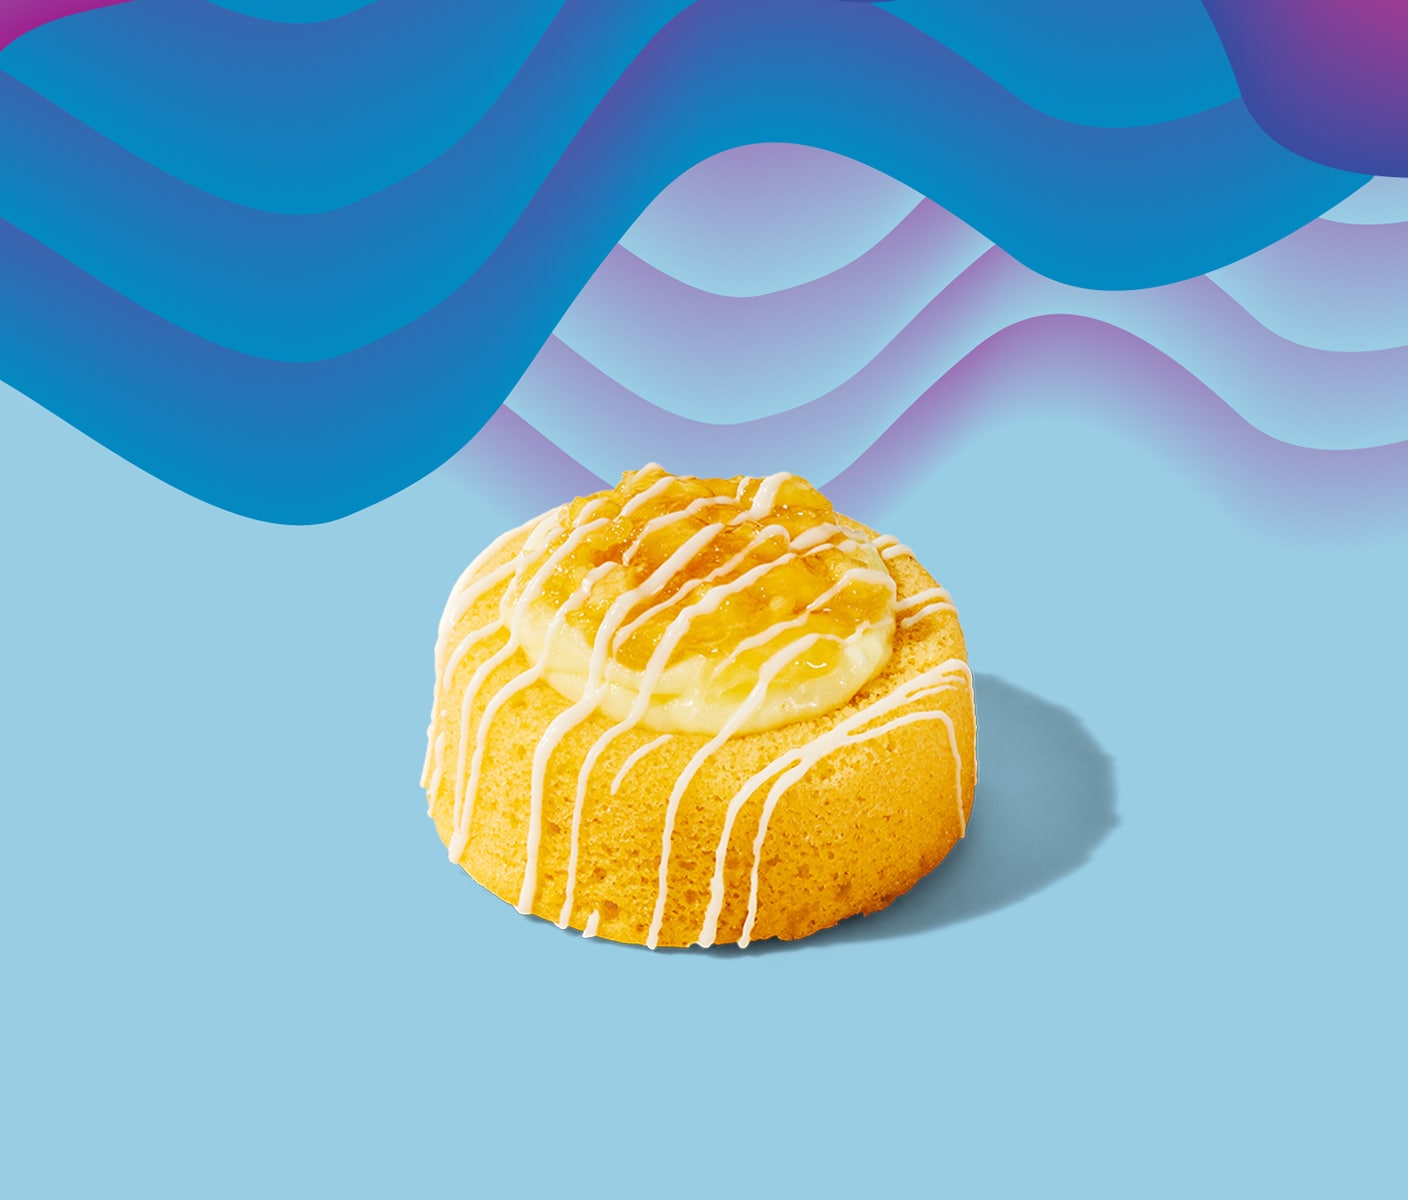 A fluffy yellow cake with a light drizzle of icing.